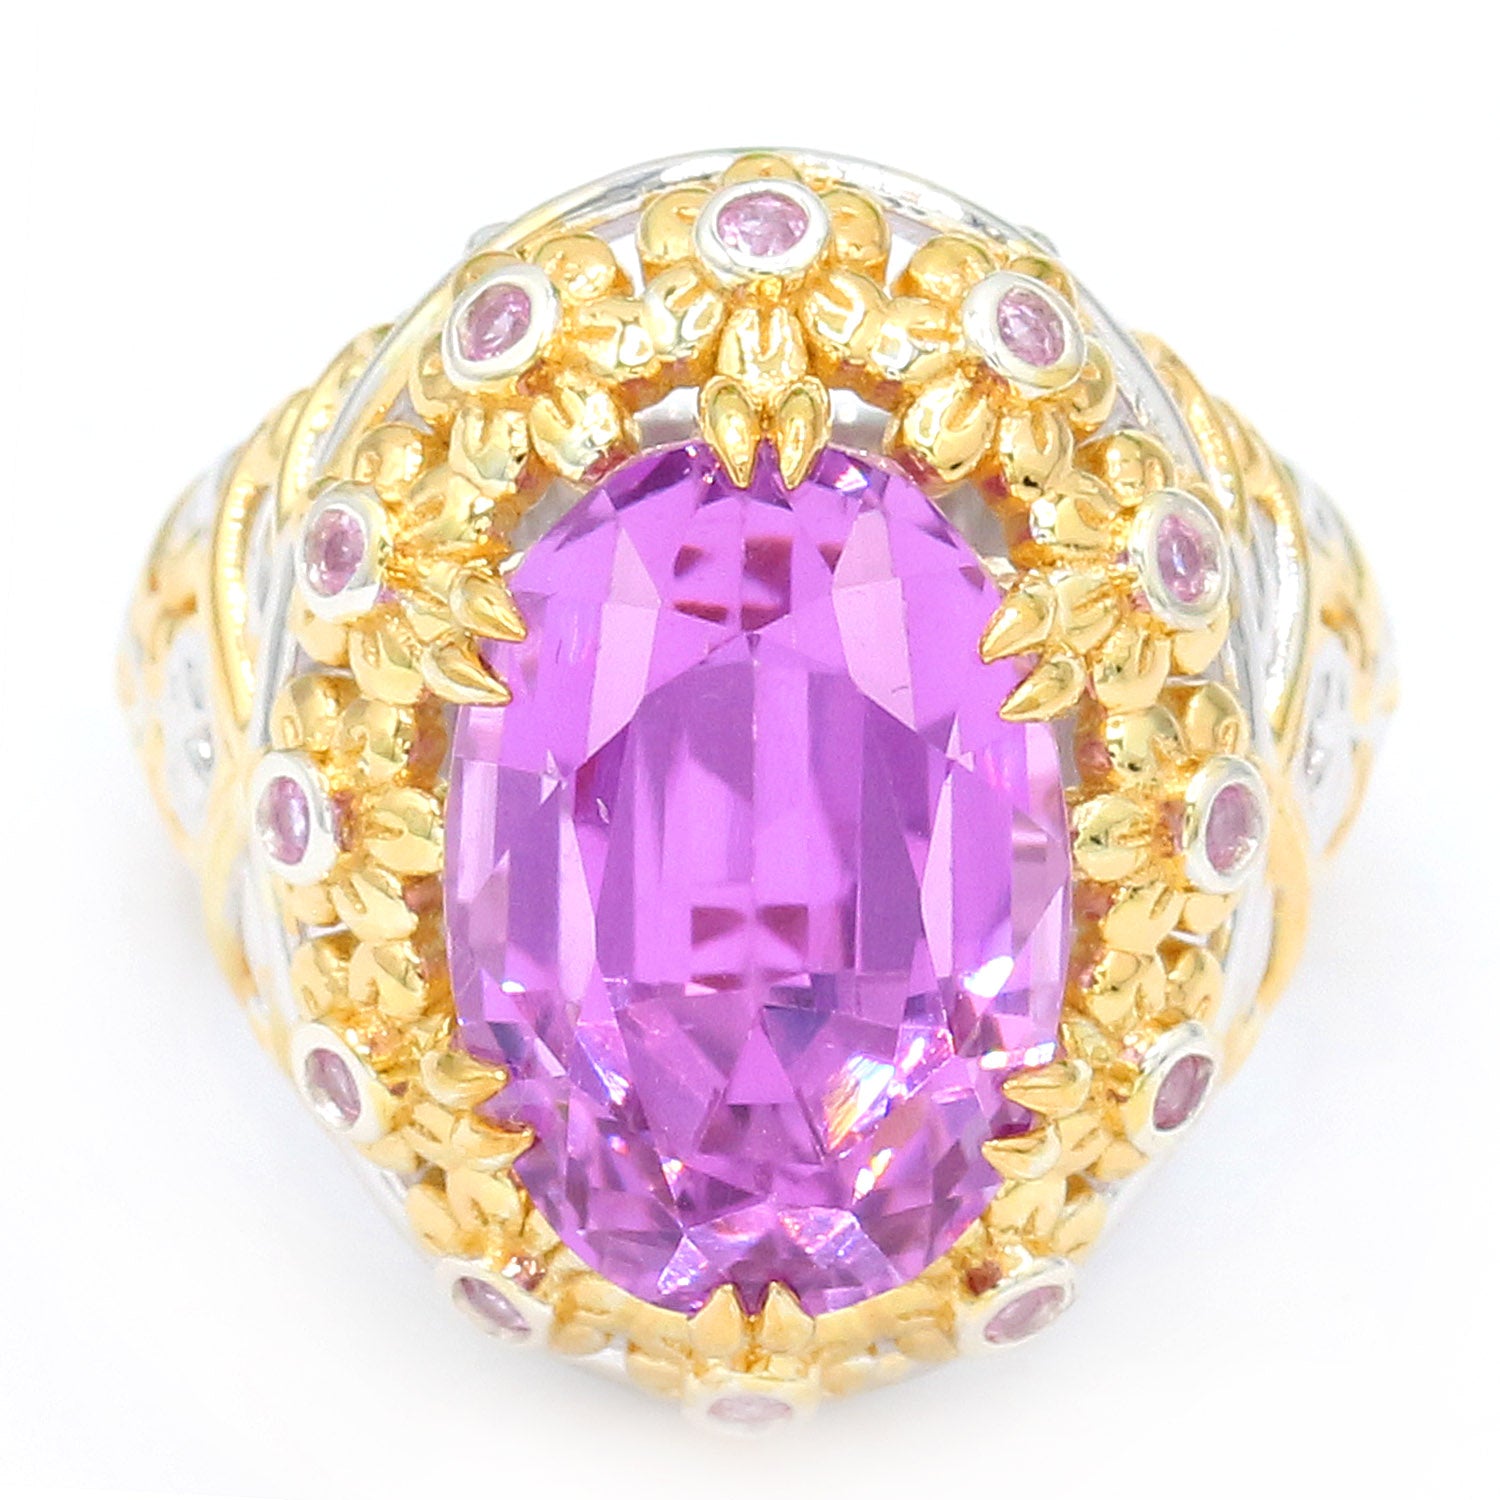 Limited Edition Gems en Vogue Luxe, One-of-a-Kind 15.37ctw Kunzite & Pink Sapphire Sunflower Ring